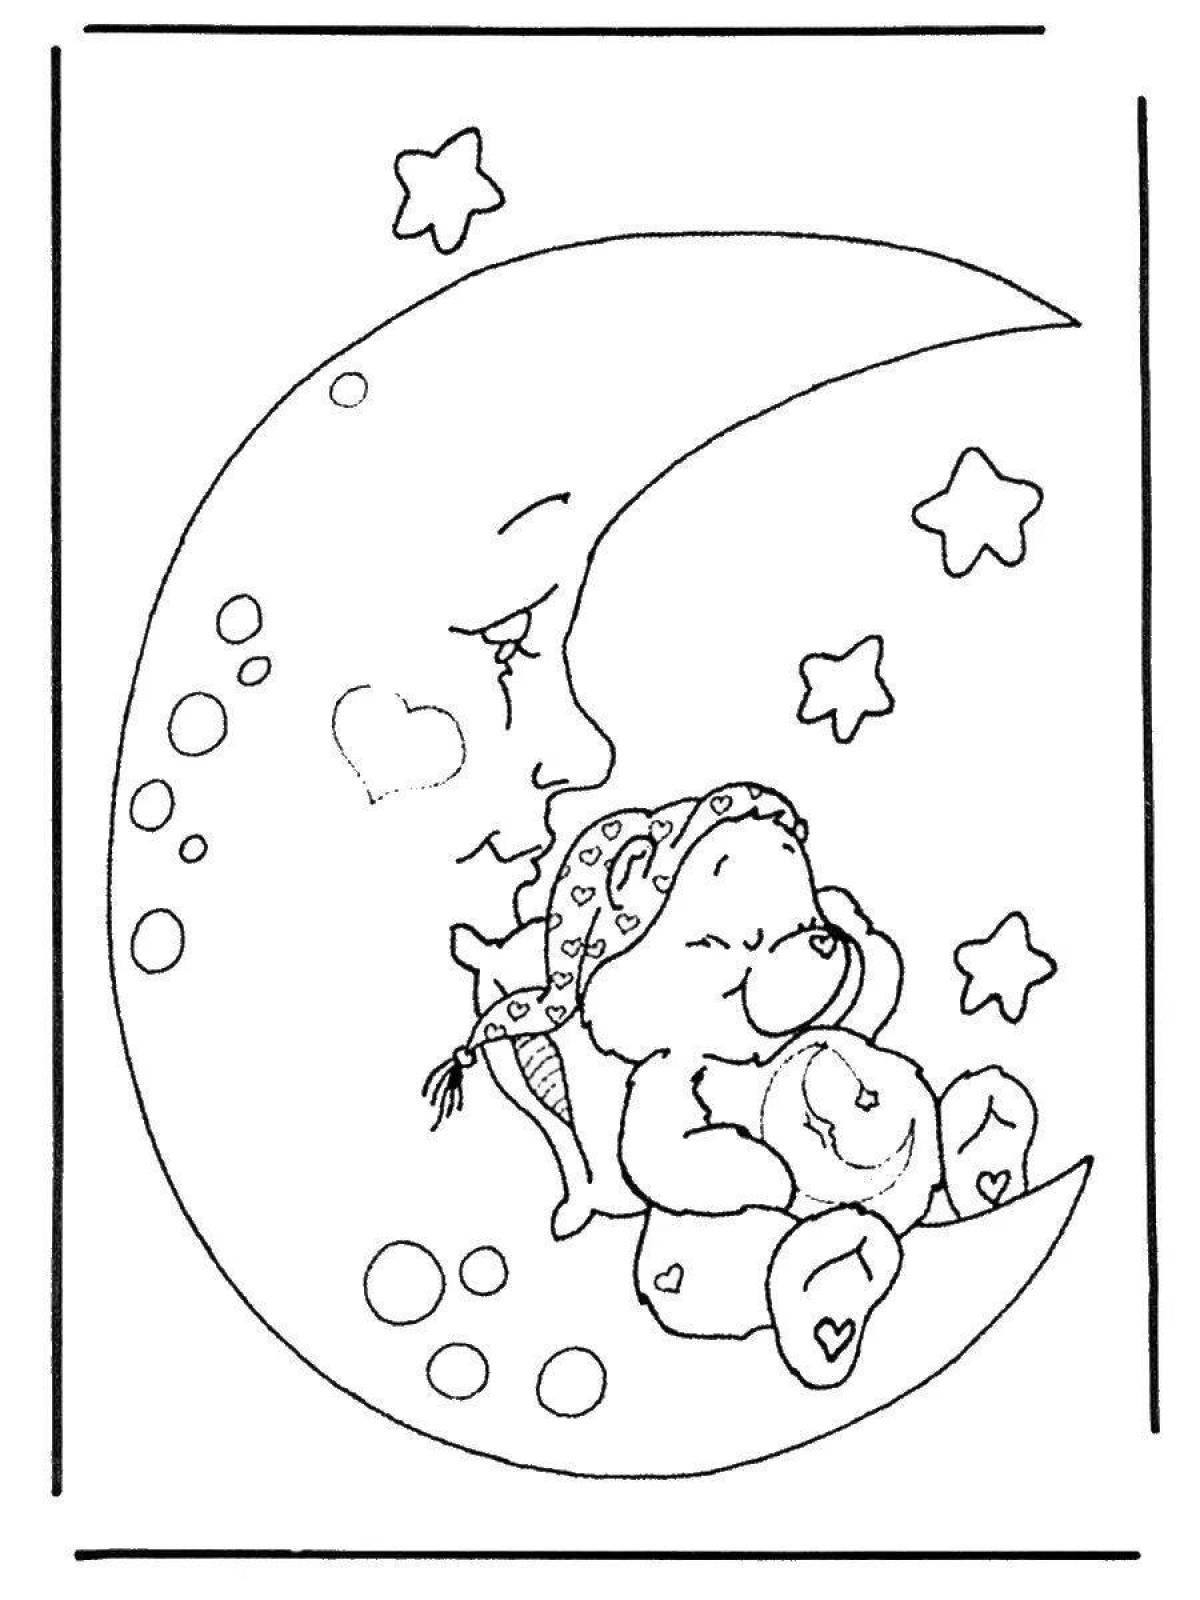 Coloring page dazzling bear on the moon